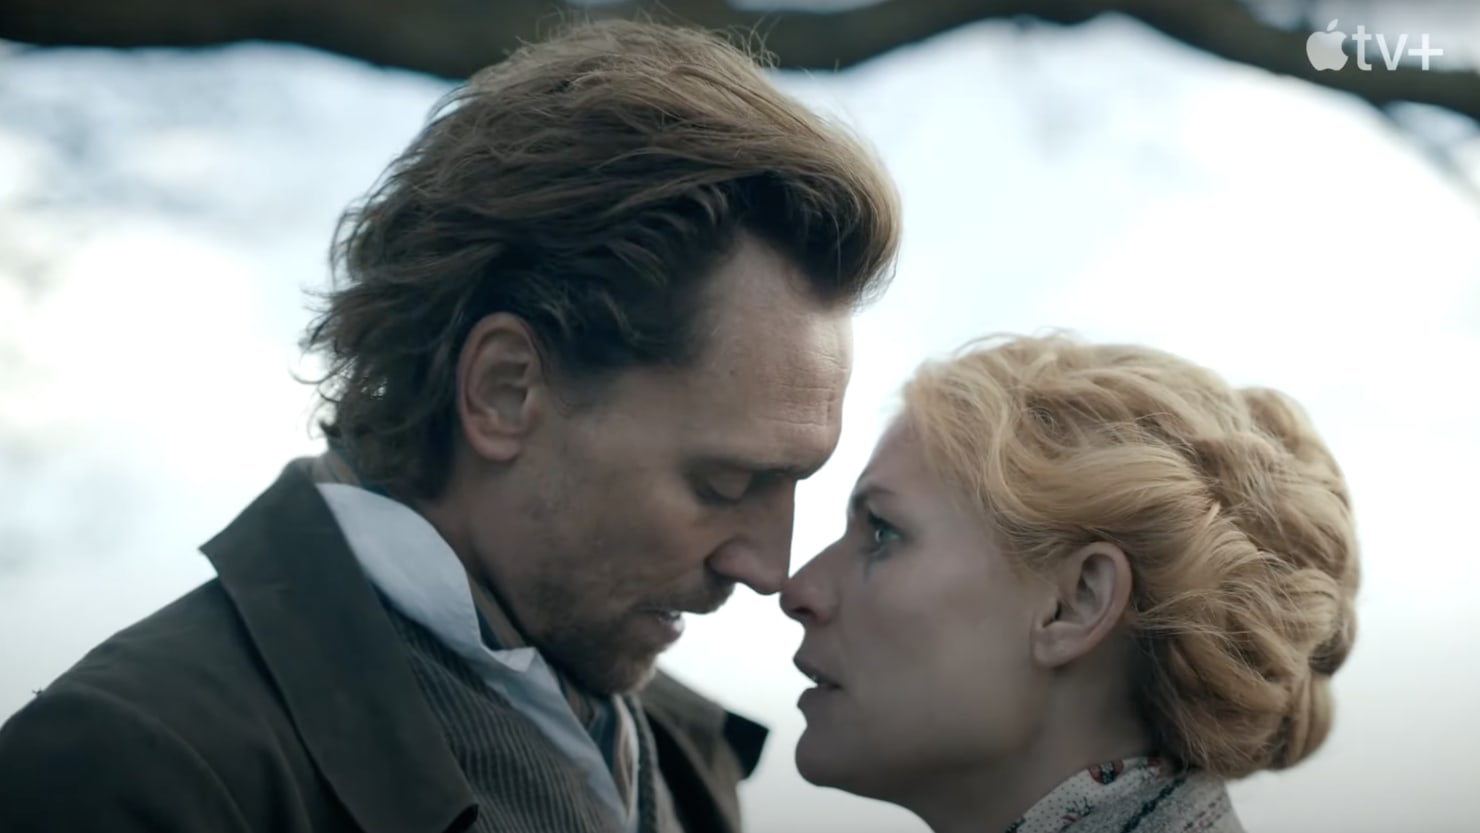 Claire Danes Returns to TV in The Essex Serpent Trailer With Tom Hiddleston